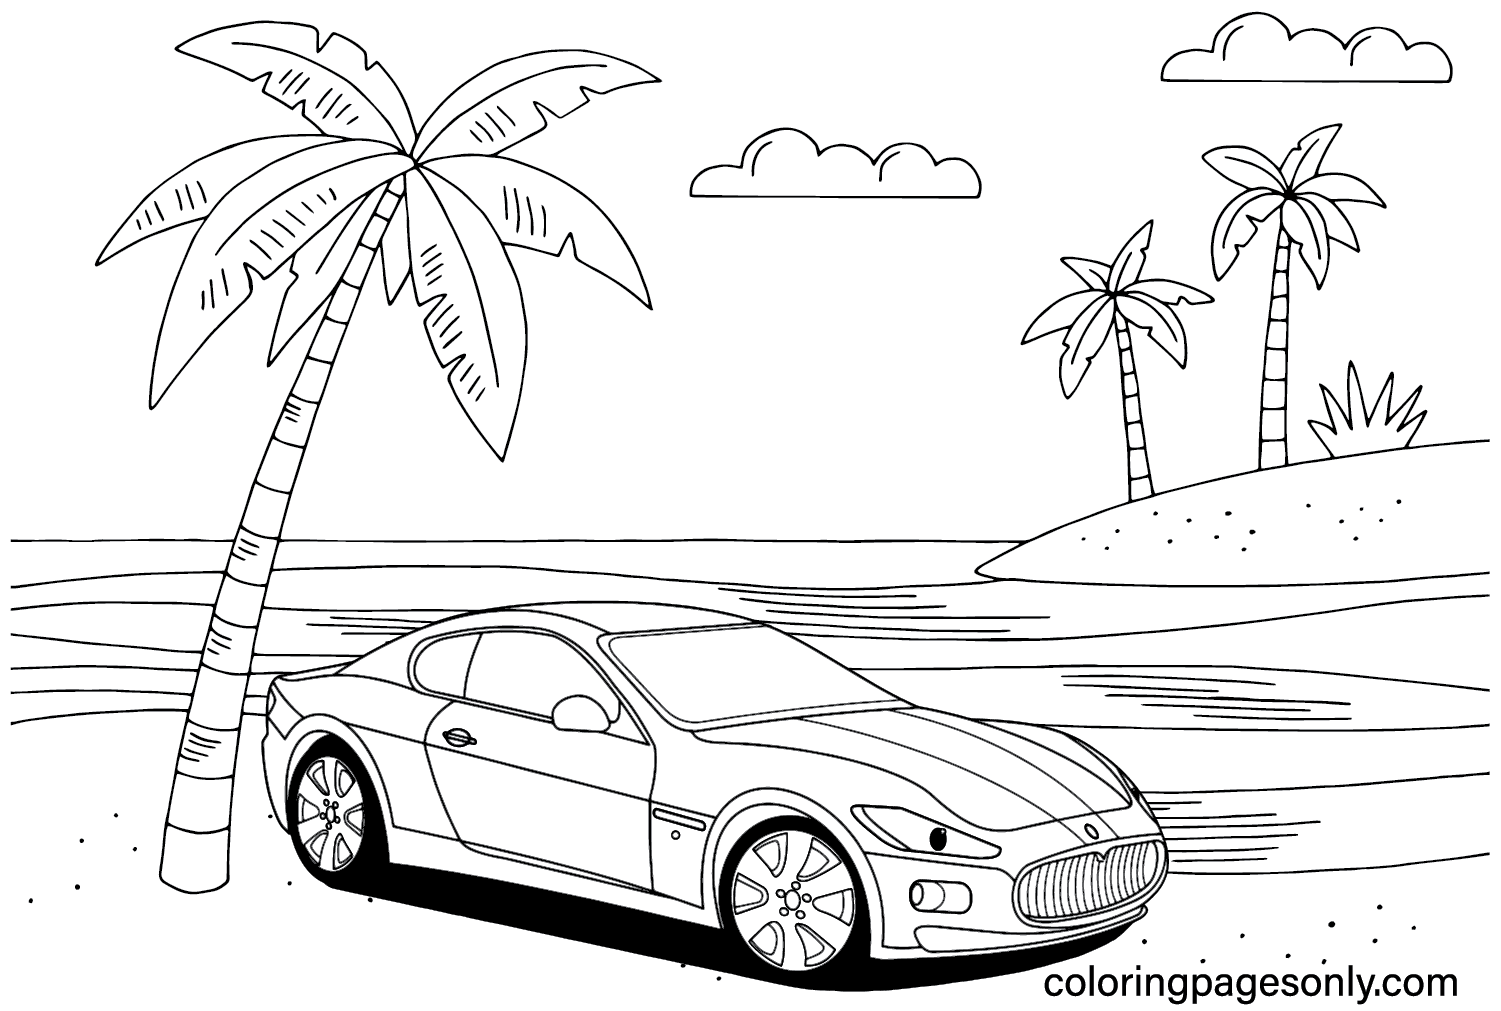 Maserati Quattroporte Coloring Page Free - Free Printable Coloring Pages